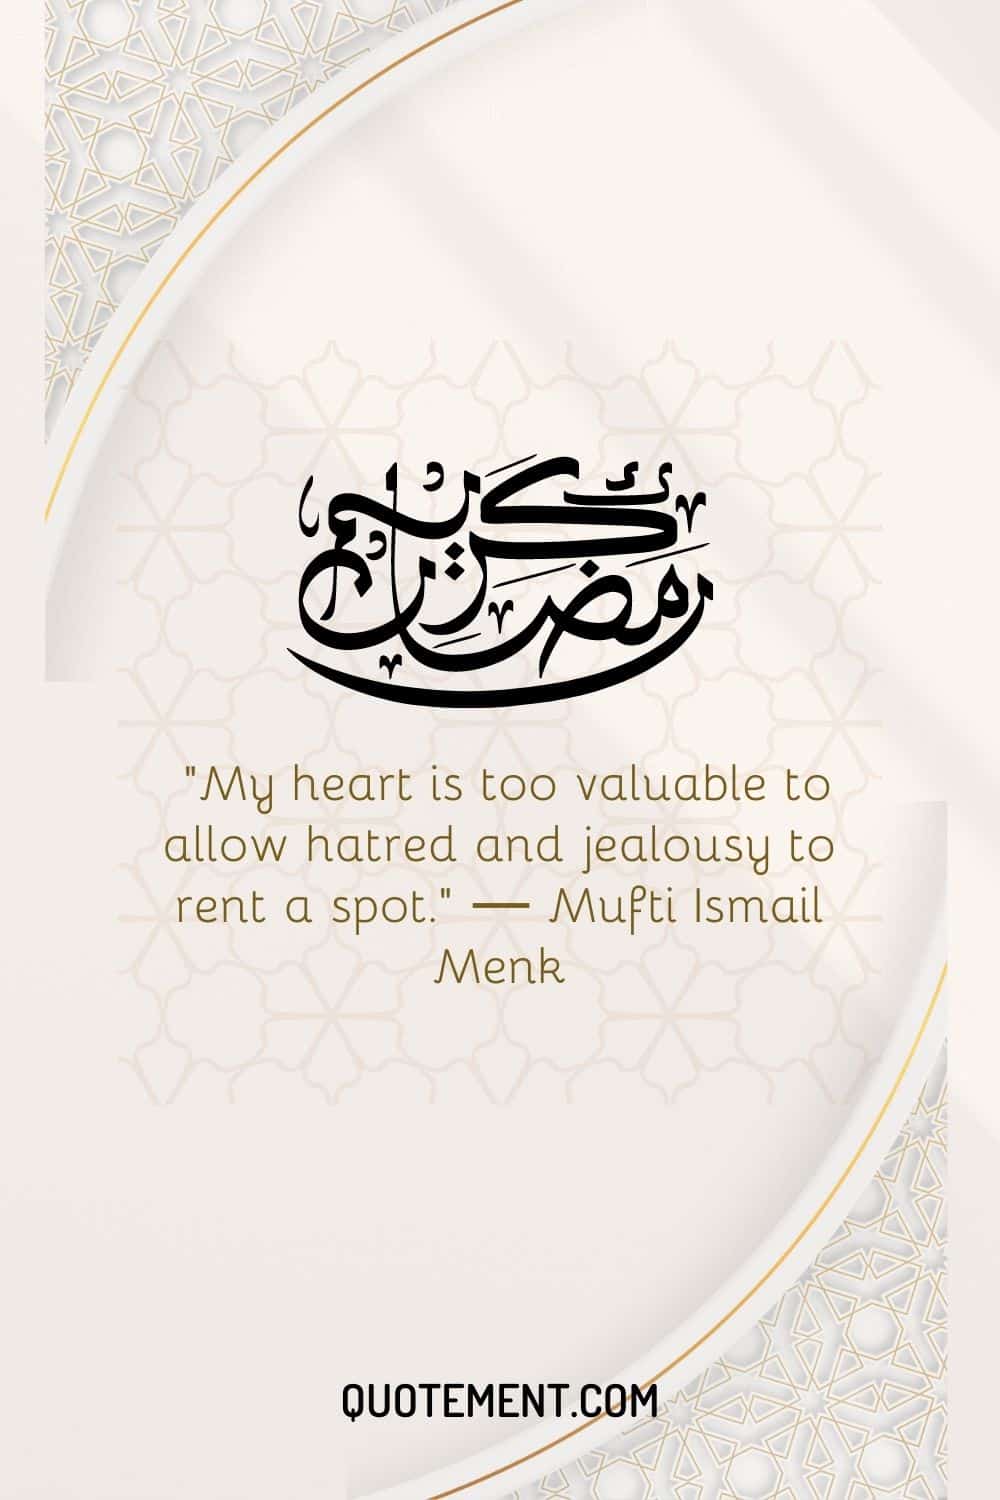 My heart is too valuable to allow hatred and jealousy to rent a spot